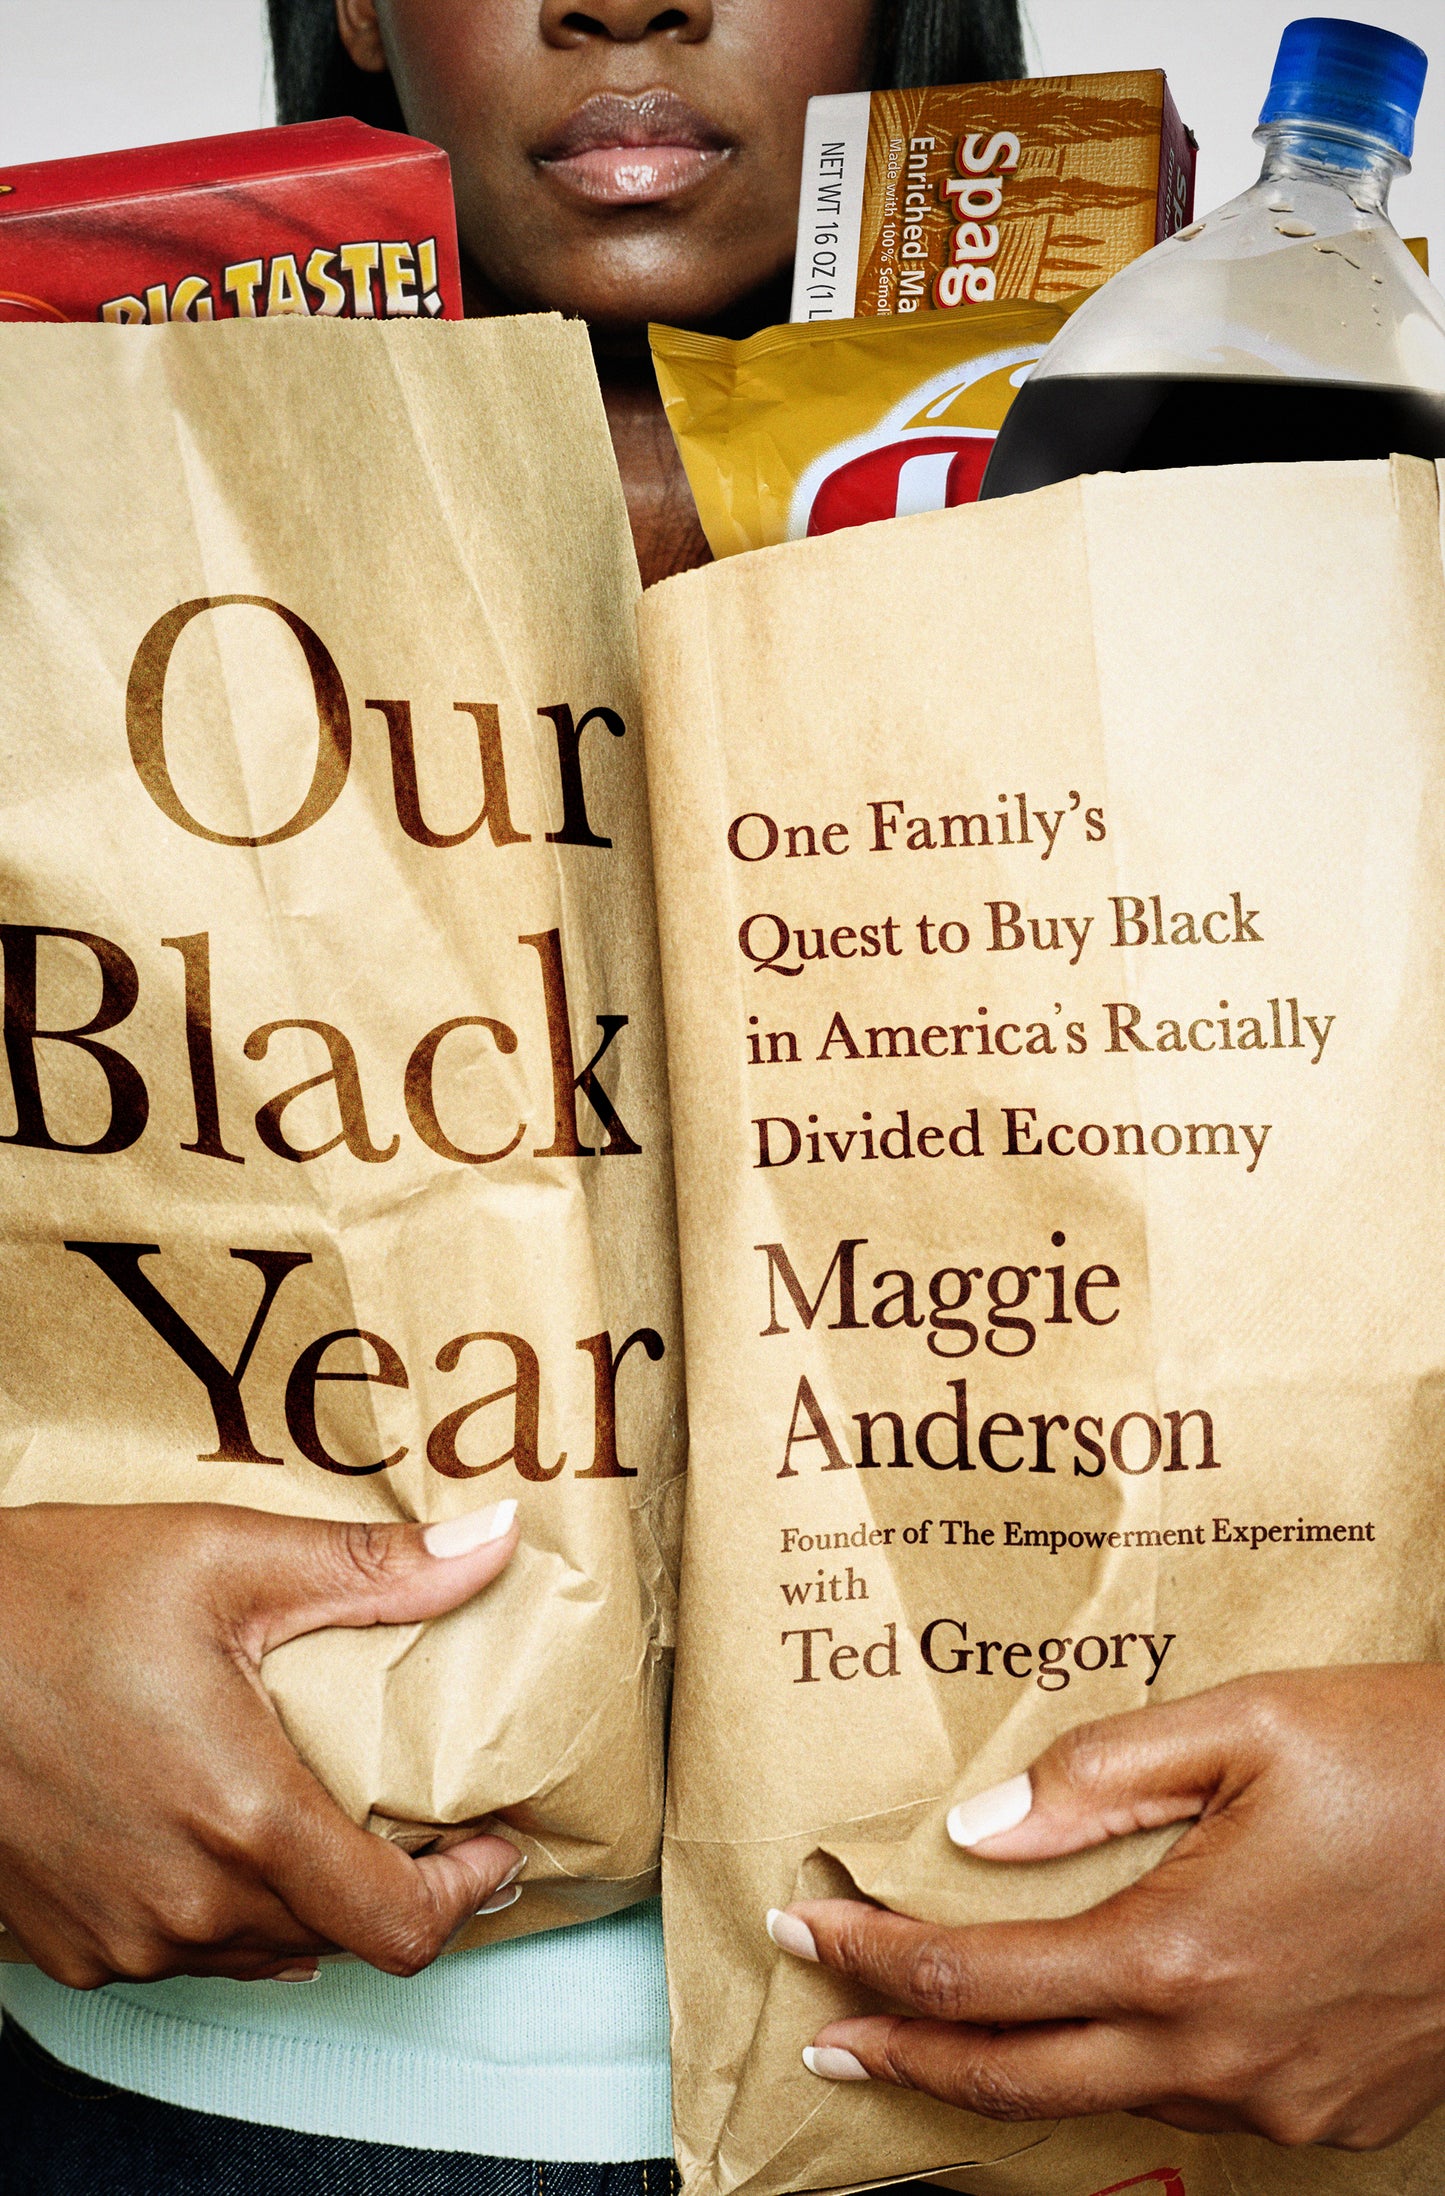 Our Black Year // One Family's Quest to Buy Buy in America's Racially Divided Economy